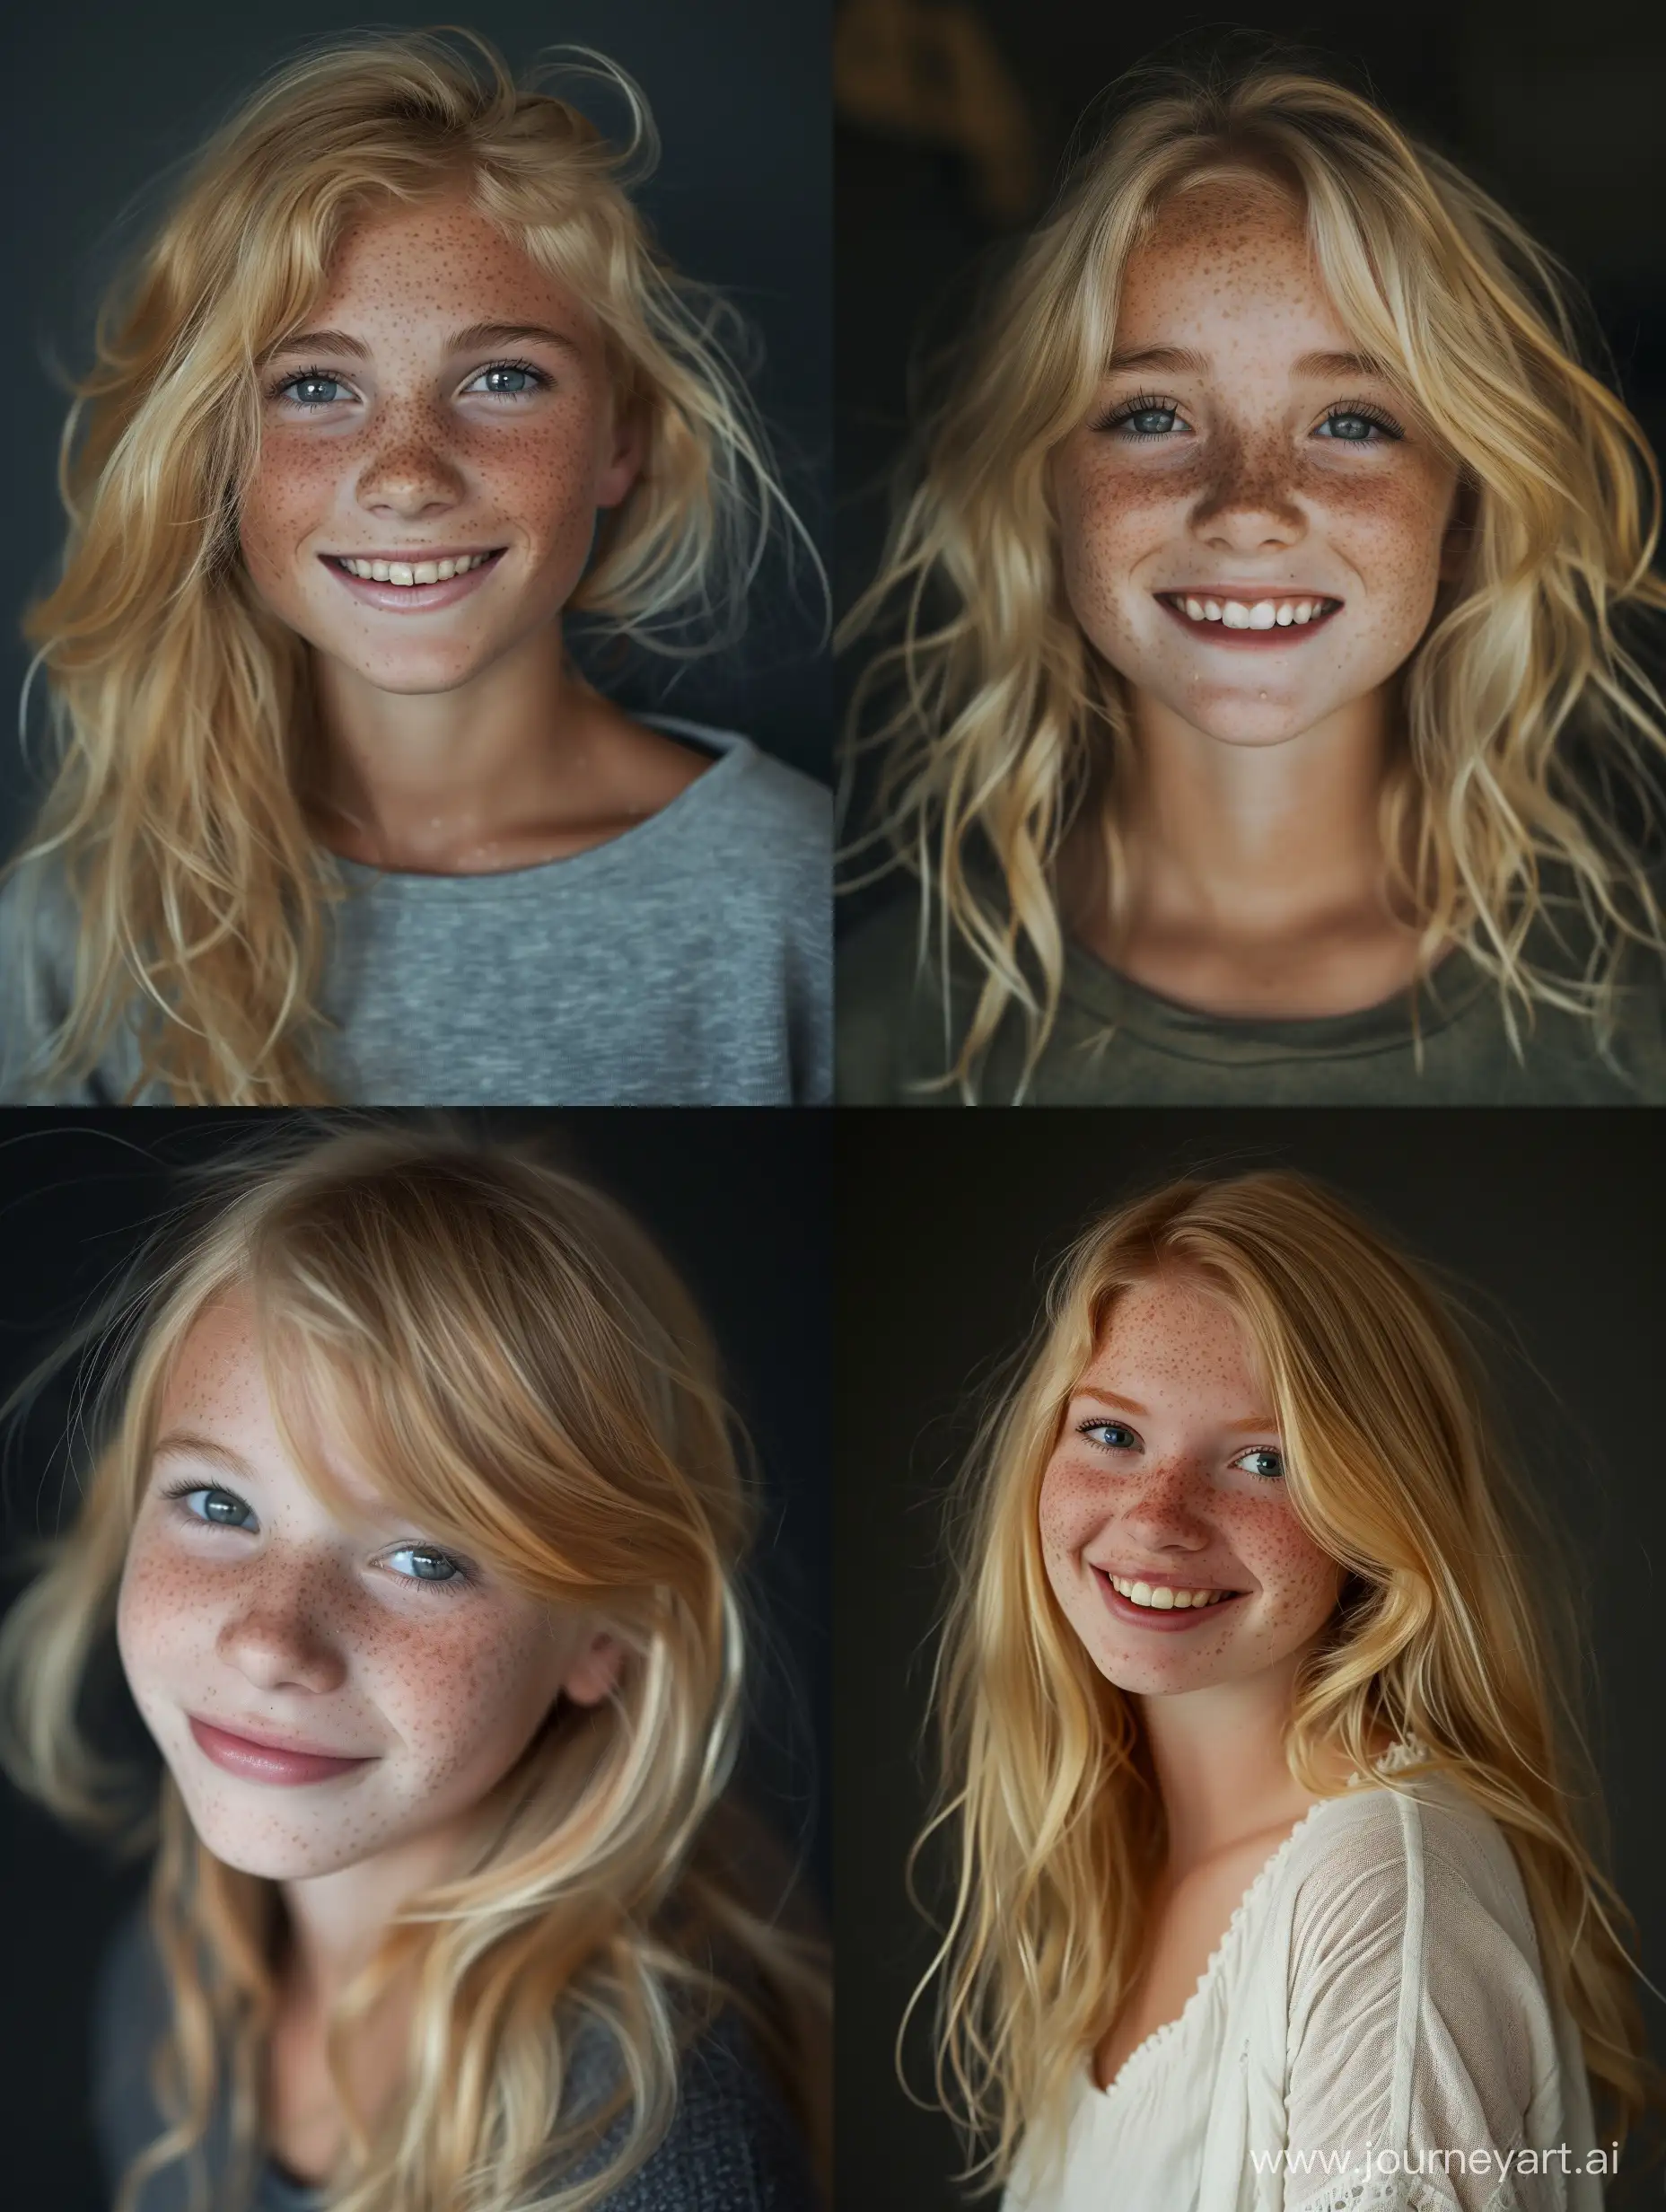 Radiant-Smiling-Blonde-Girl-with-Freckles-in-Dramatic-Lighting